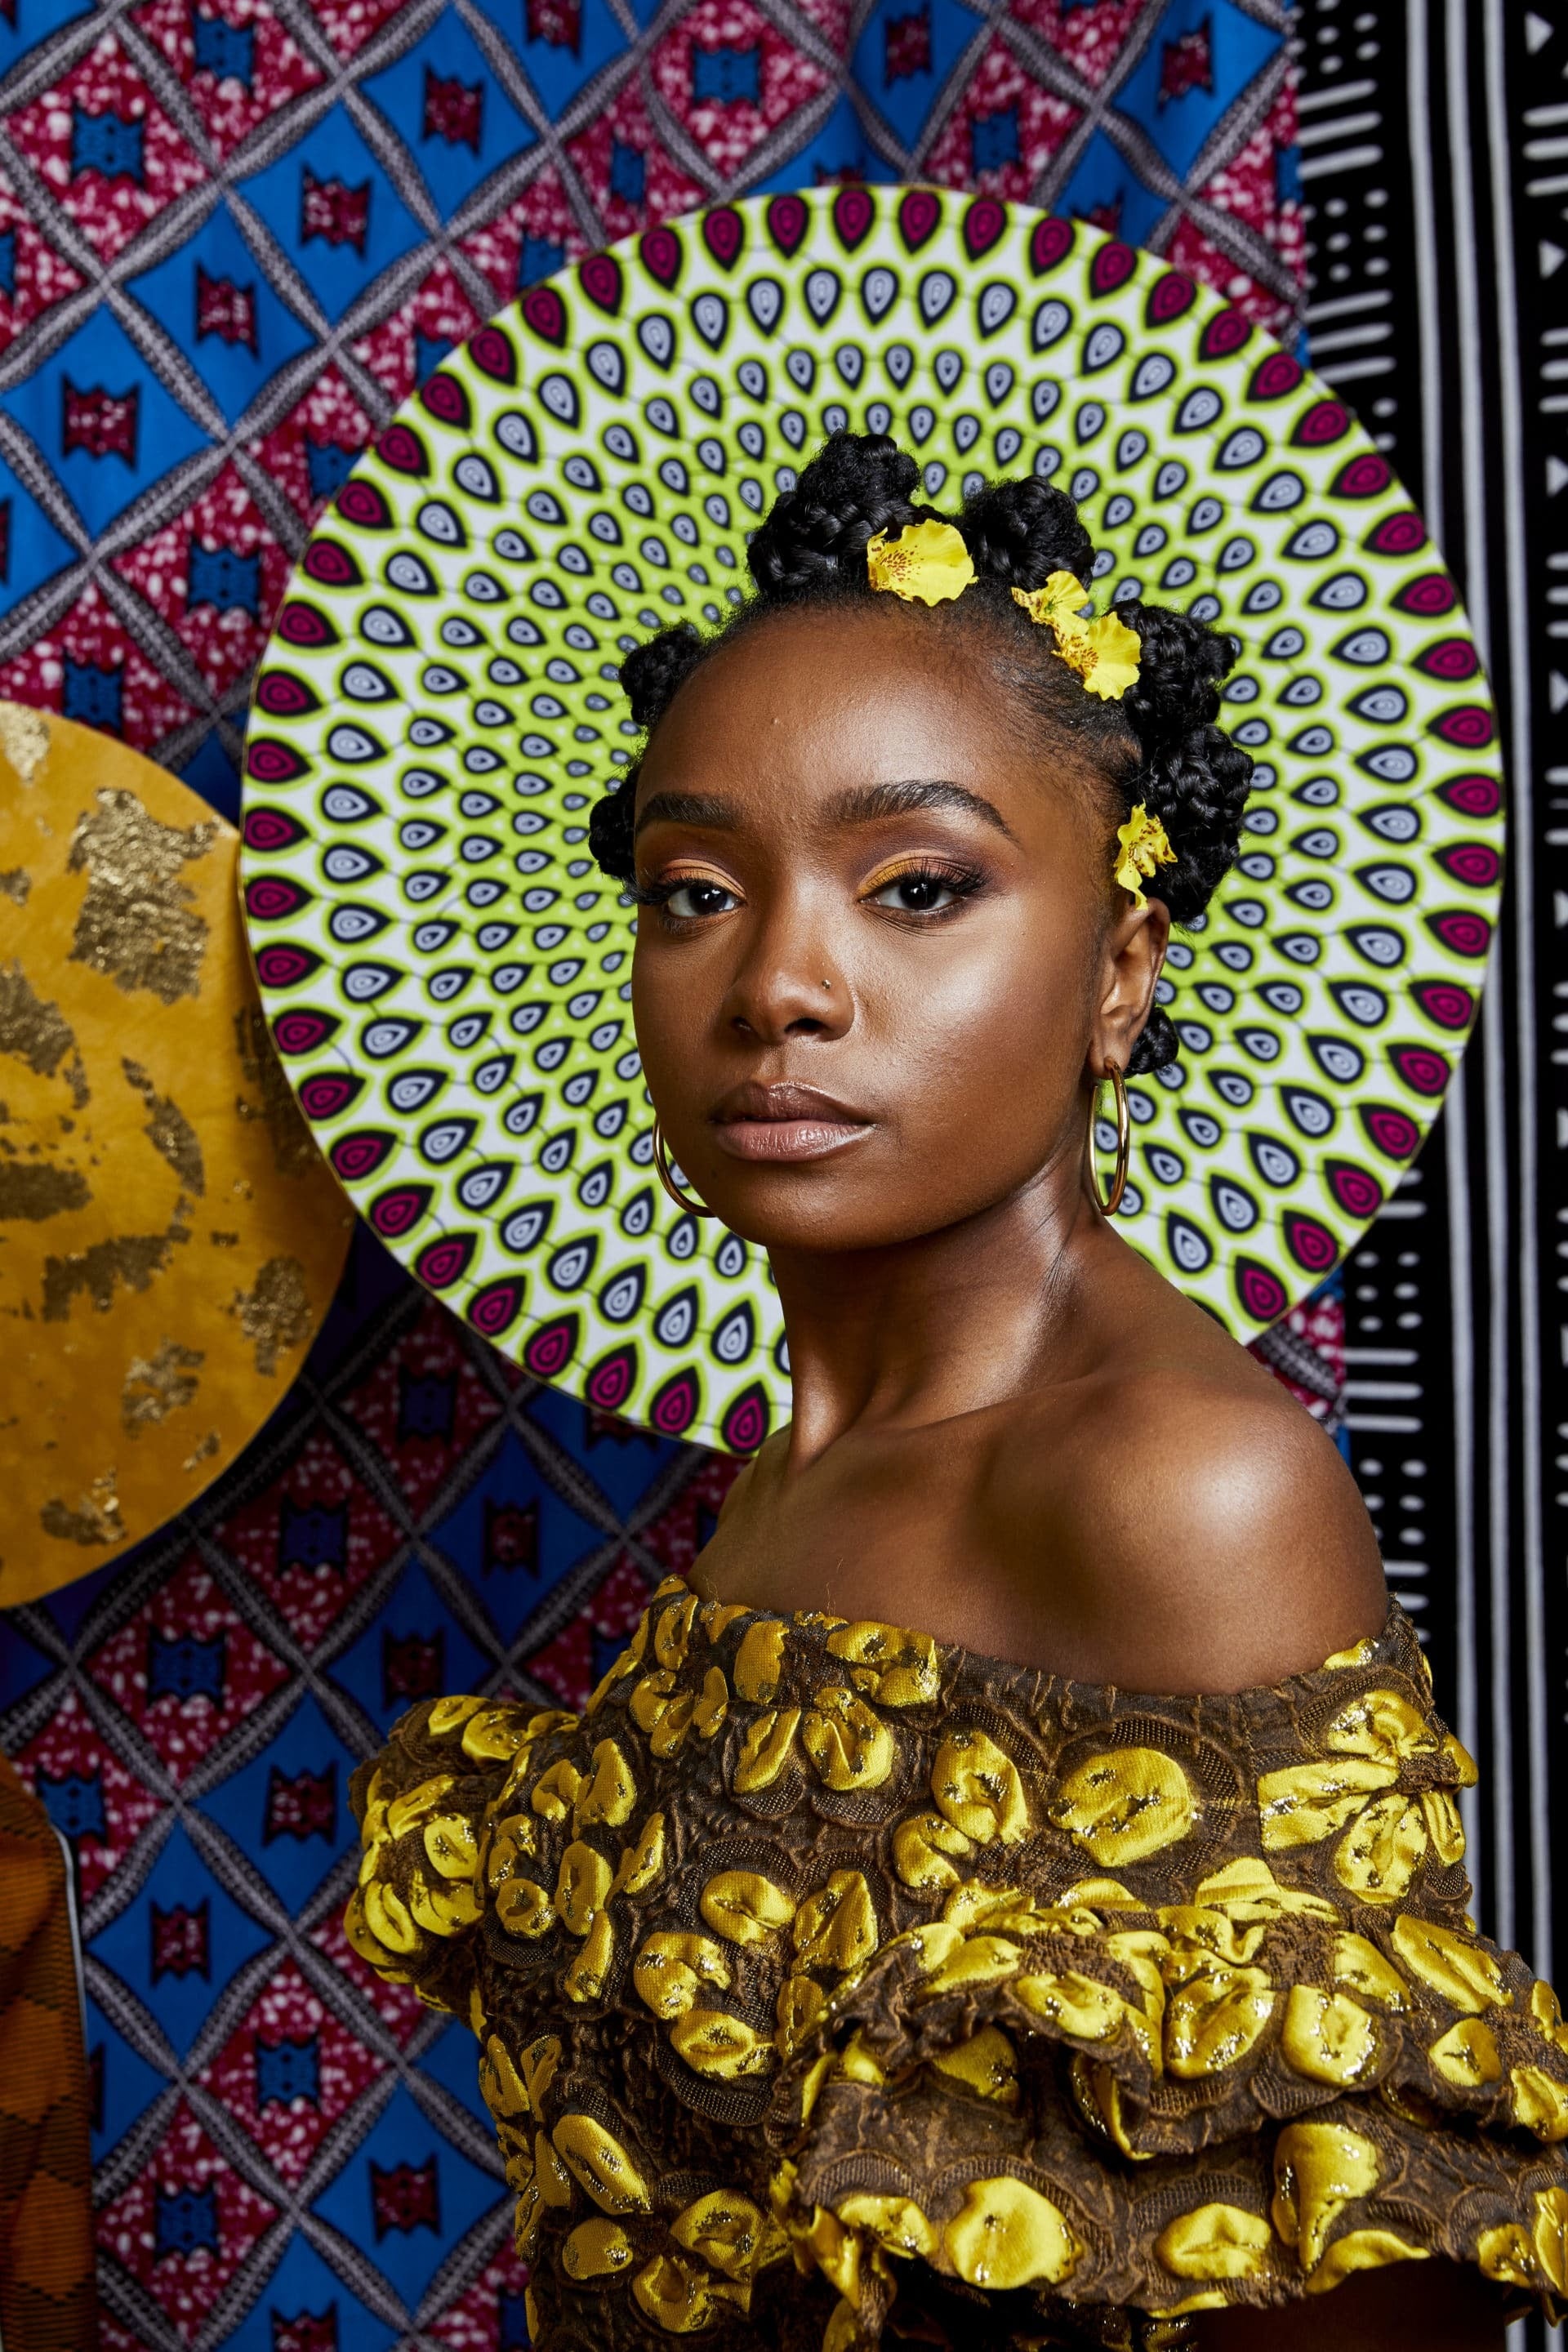 Exclusive Look At The Stunning 2019 ESSENCE Black Women In Hollywood Portraits